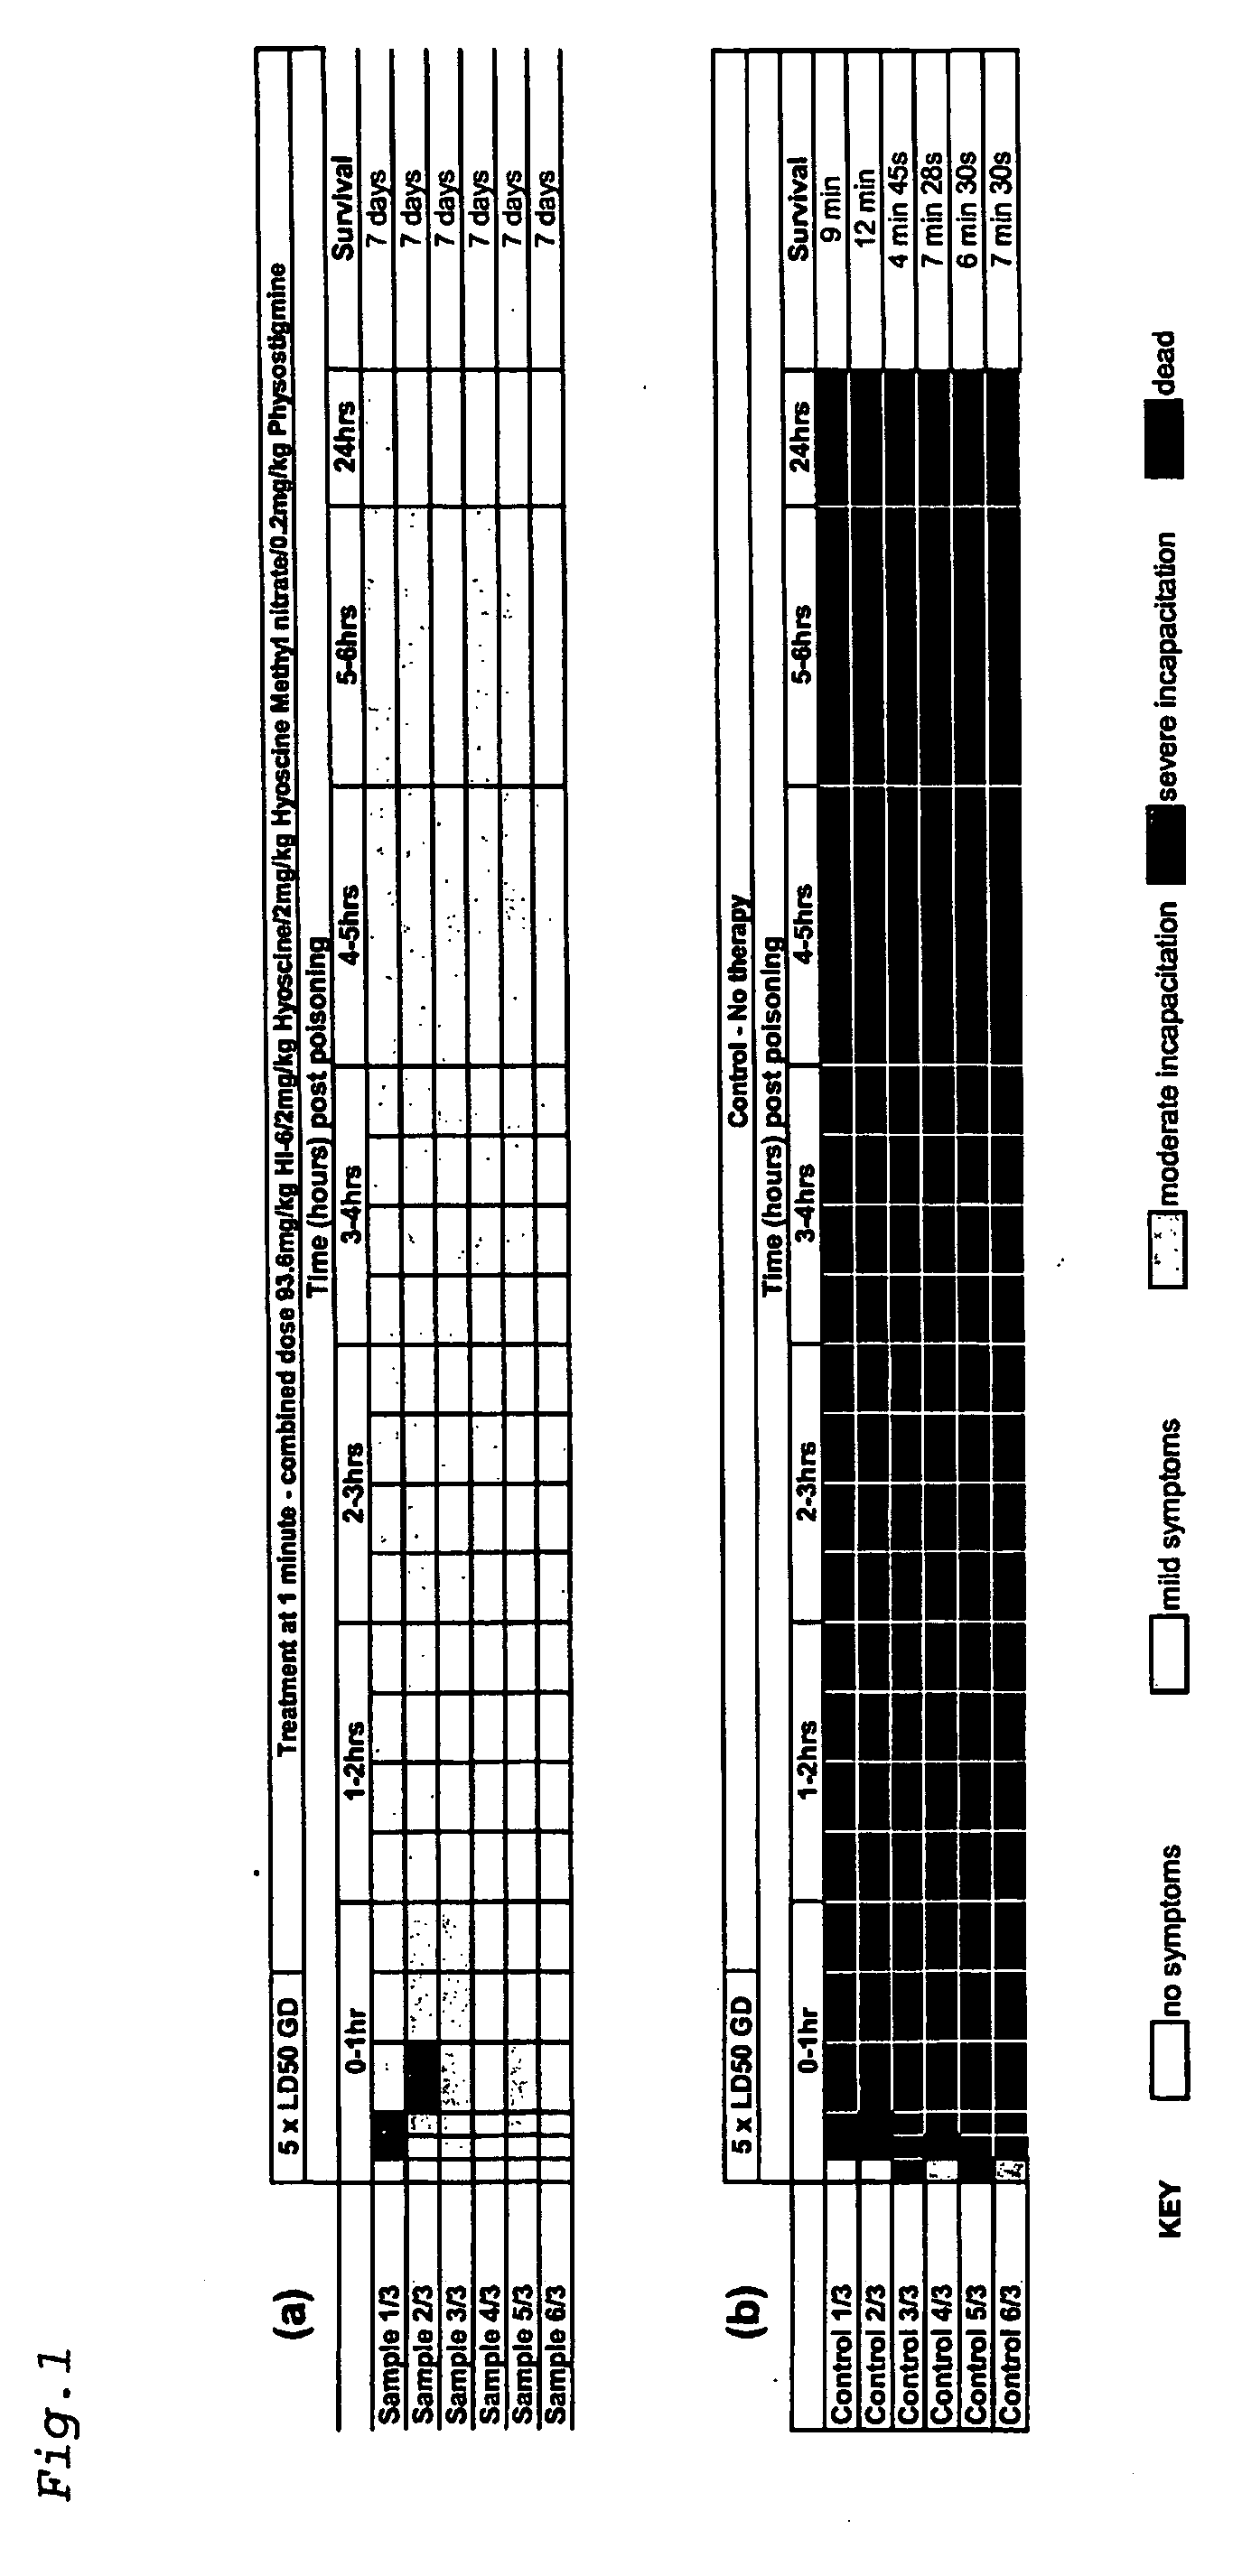 Pharmaceutical compositions for the treatment of organophosphate poisoning